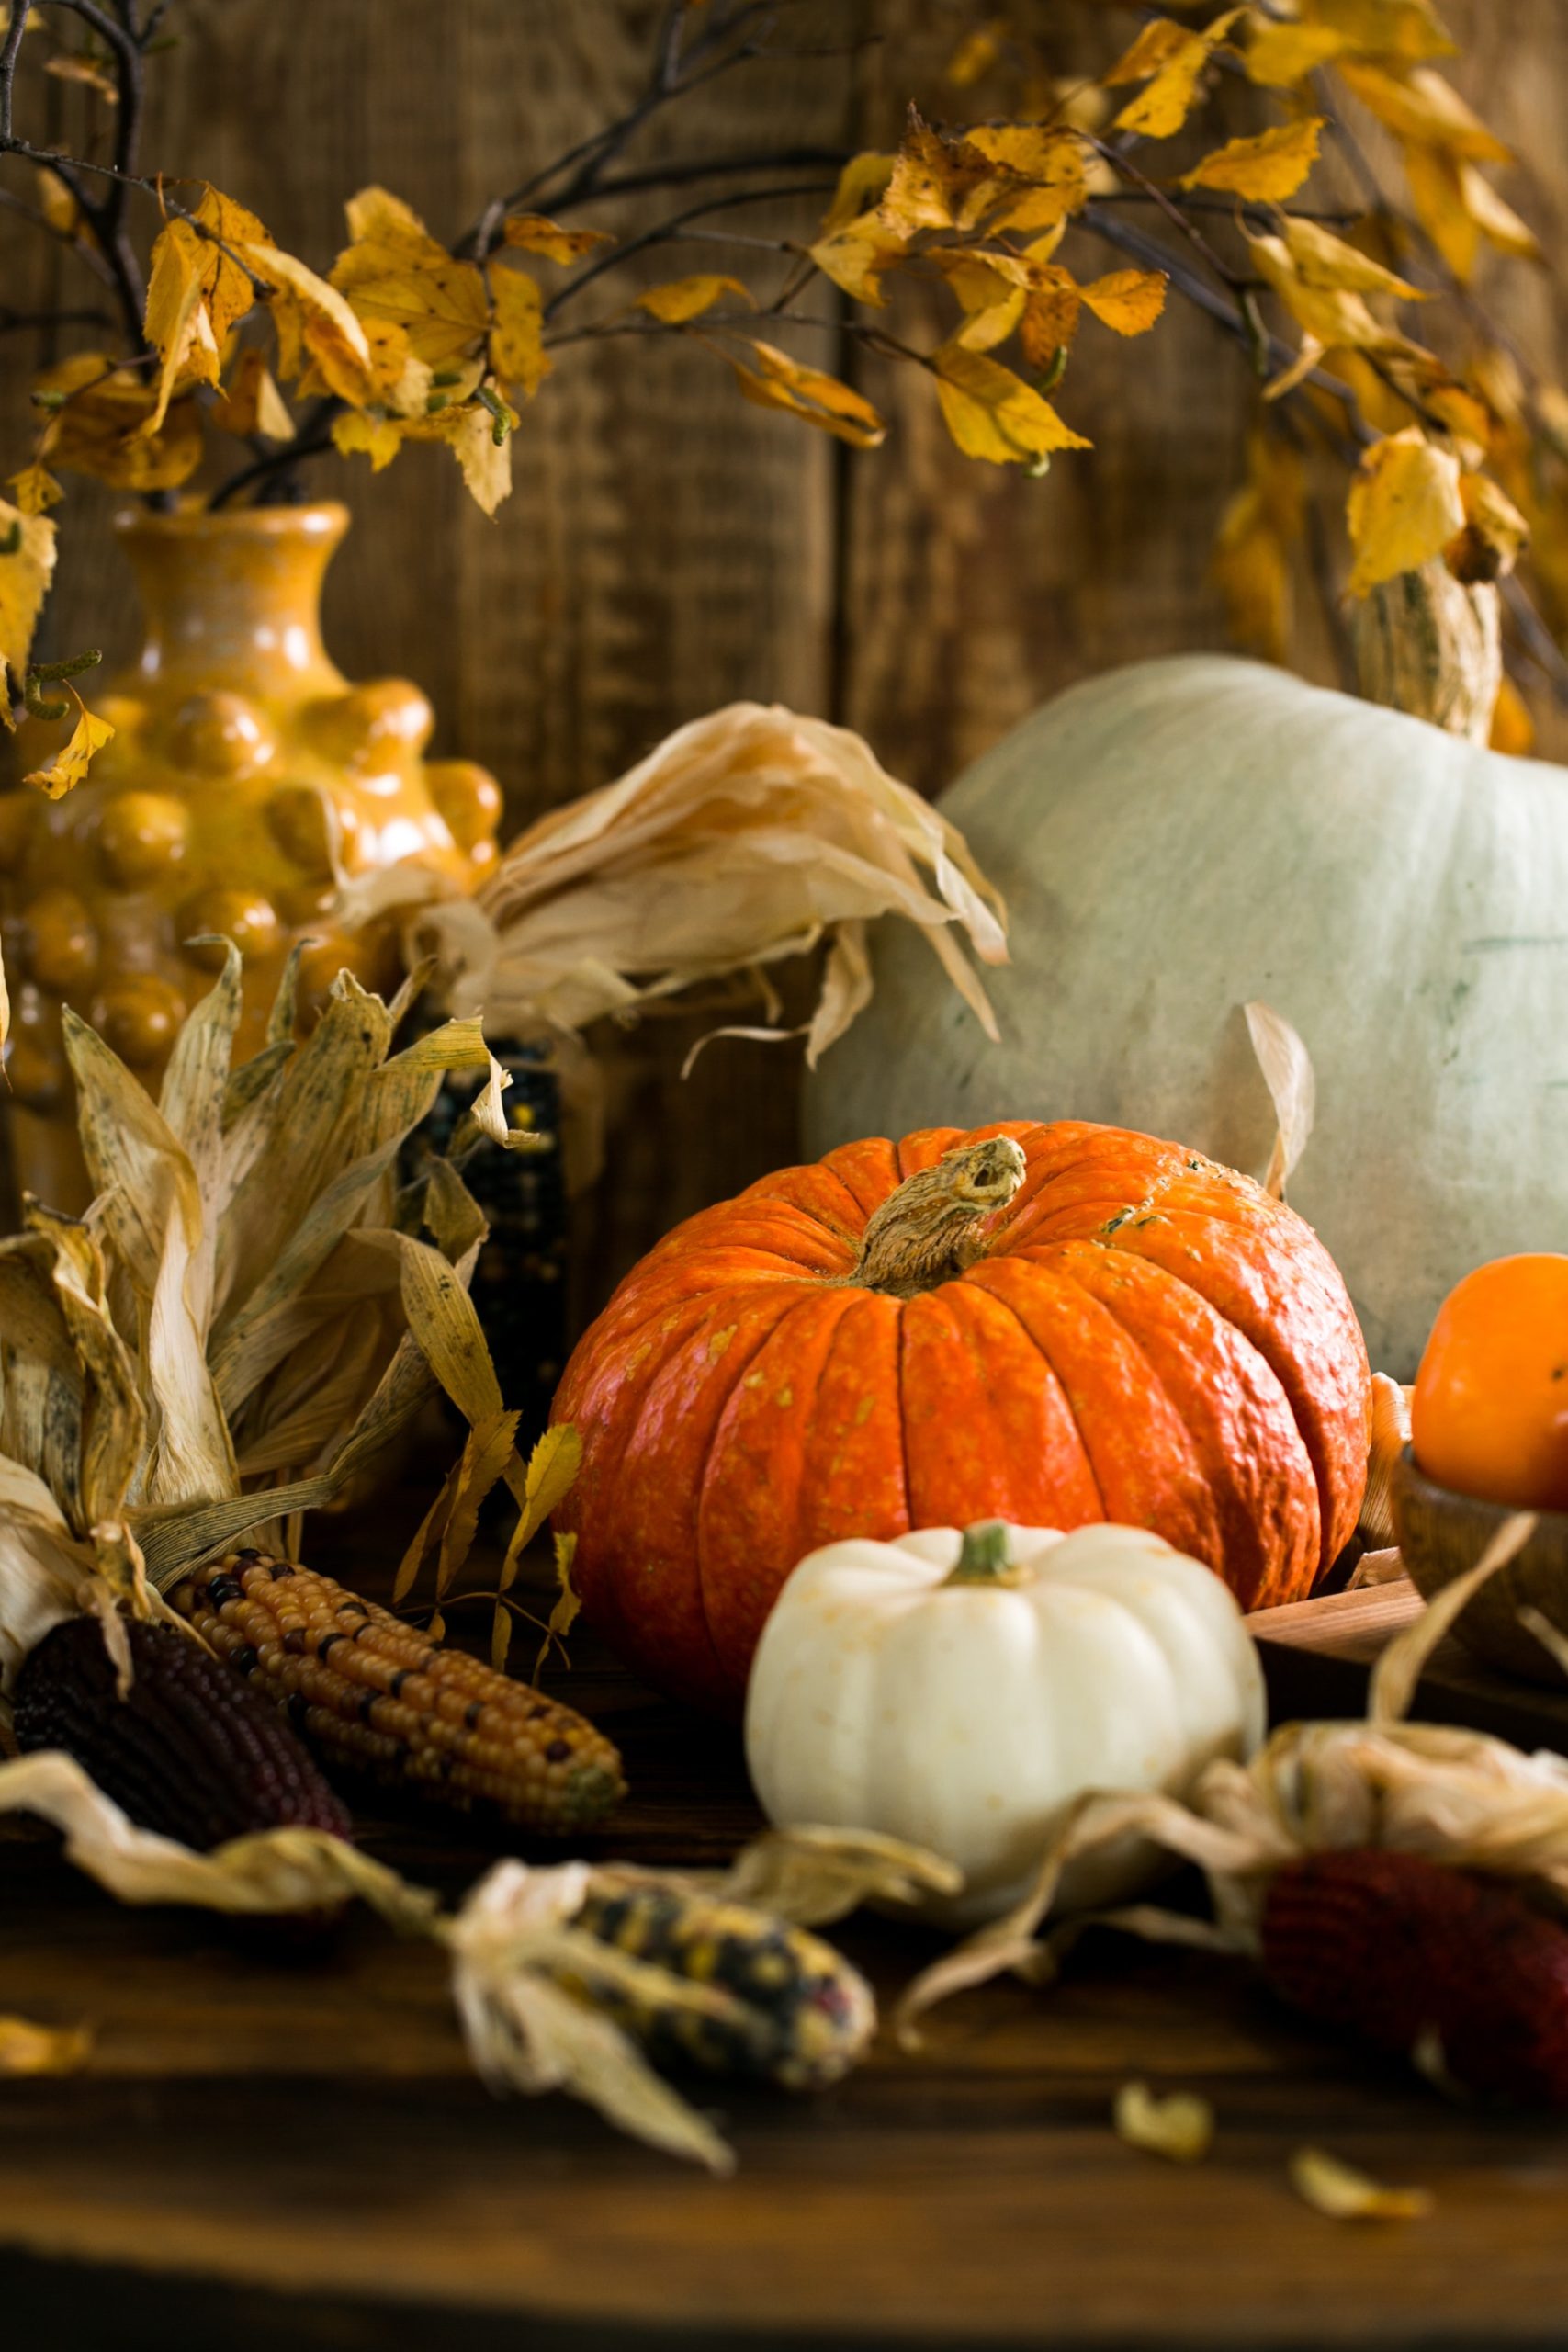 pumpkins, gourds, corn on a cob, corn husk, earthenware, and autumn leaves.